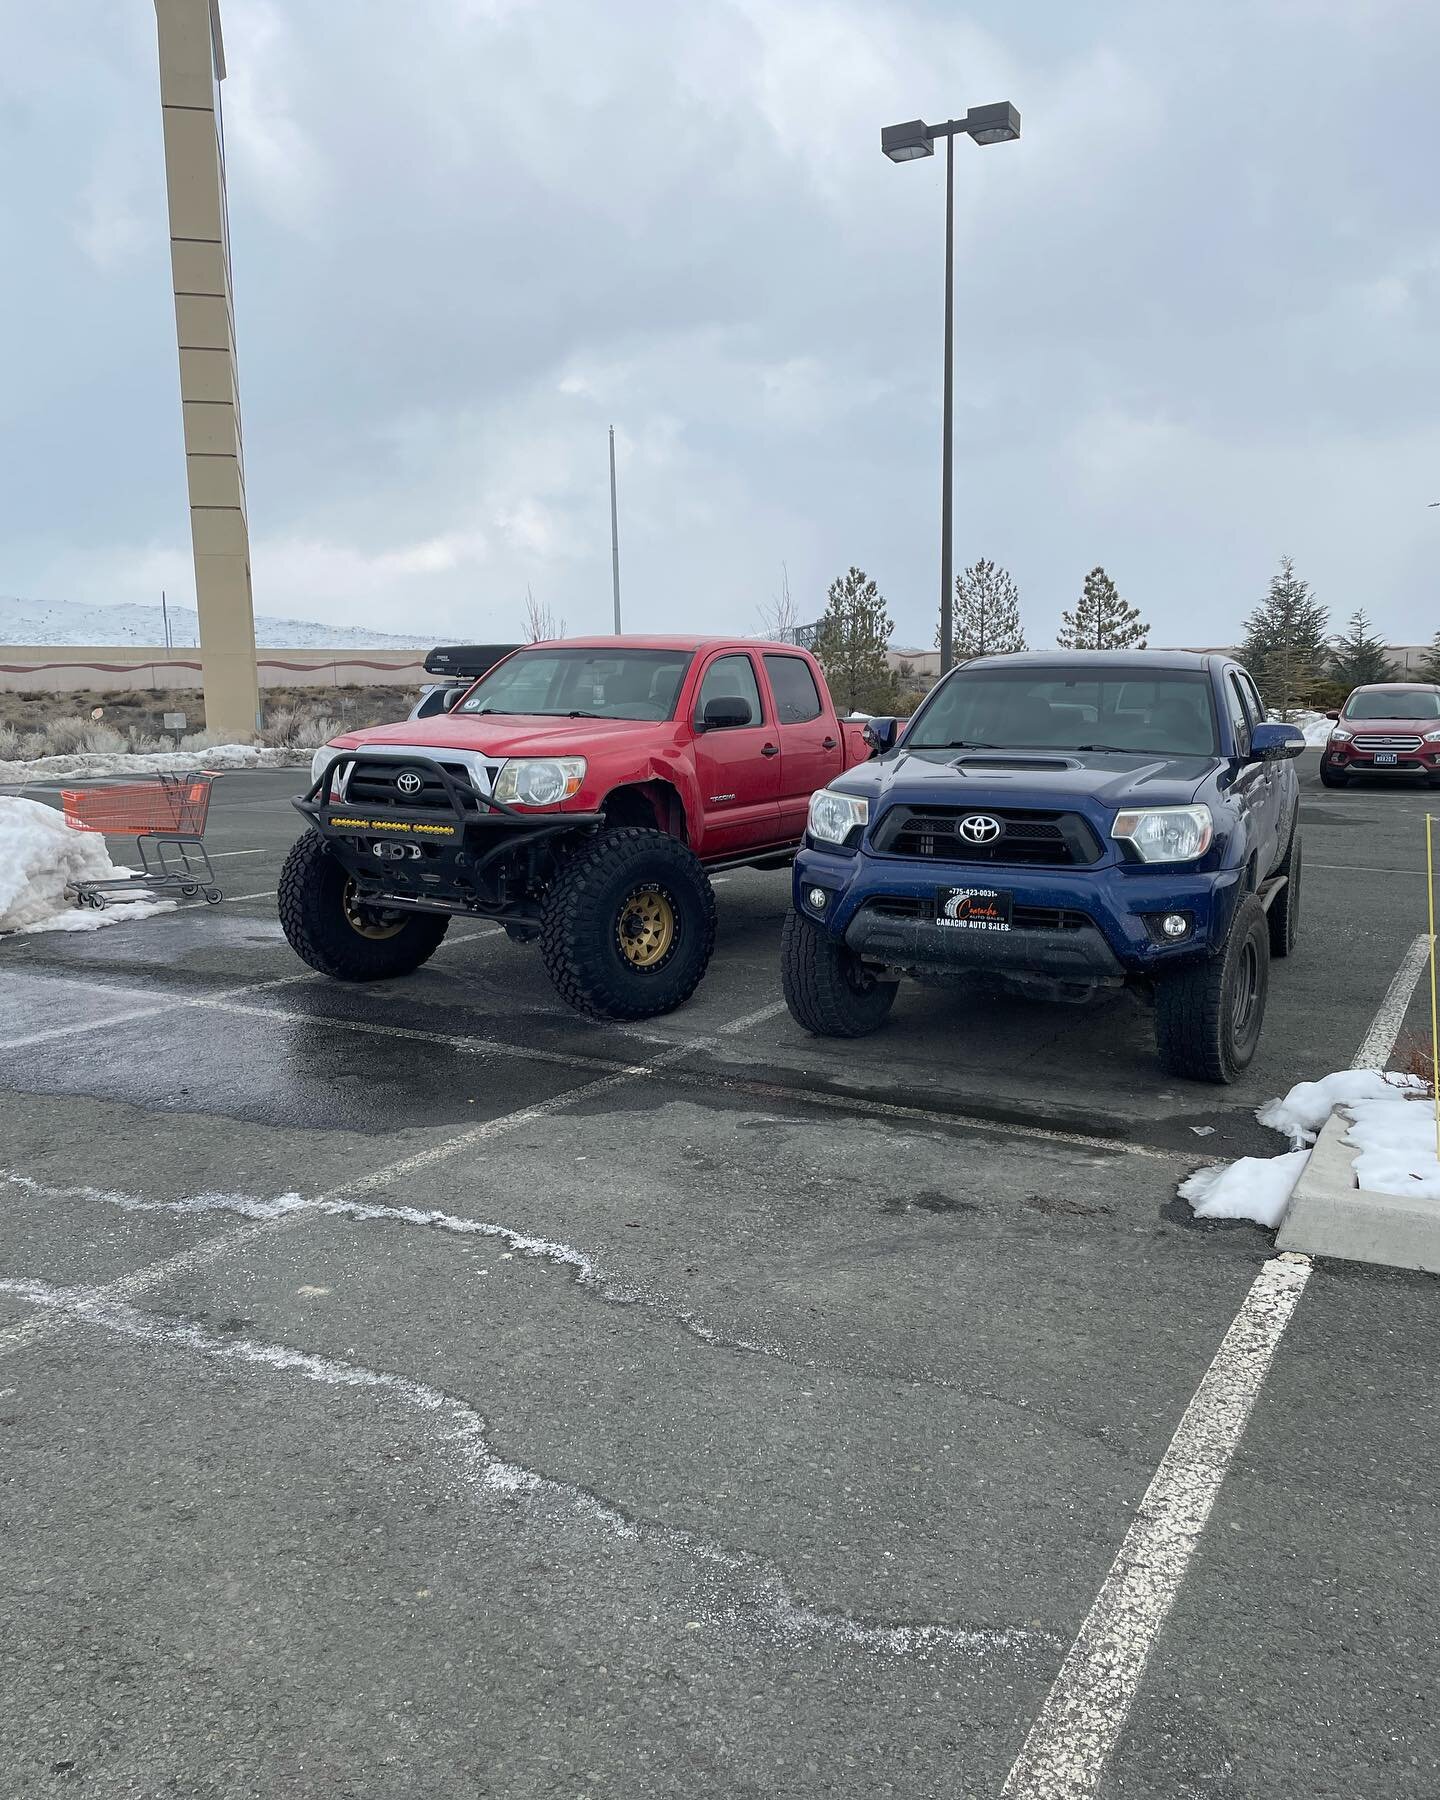 One ton taco next to a leveled one. How much lift you think we&rsquo;re workin with? #martecengineering #martectacomakit  #toyota #tacoma #2ndgentacoma #teamyukon